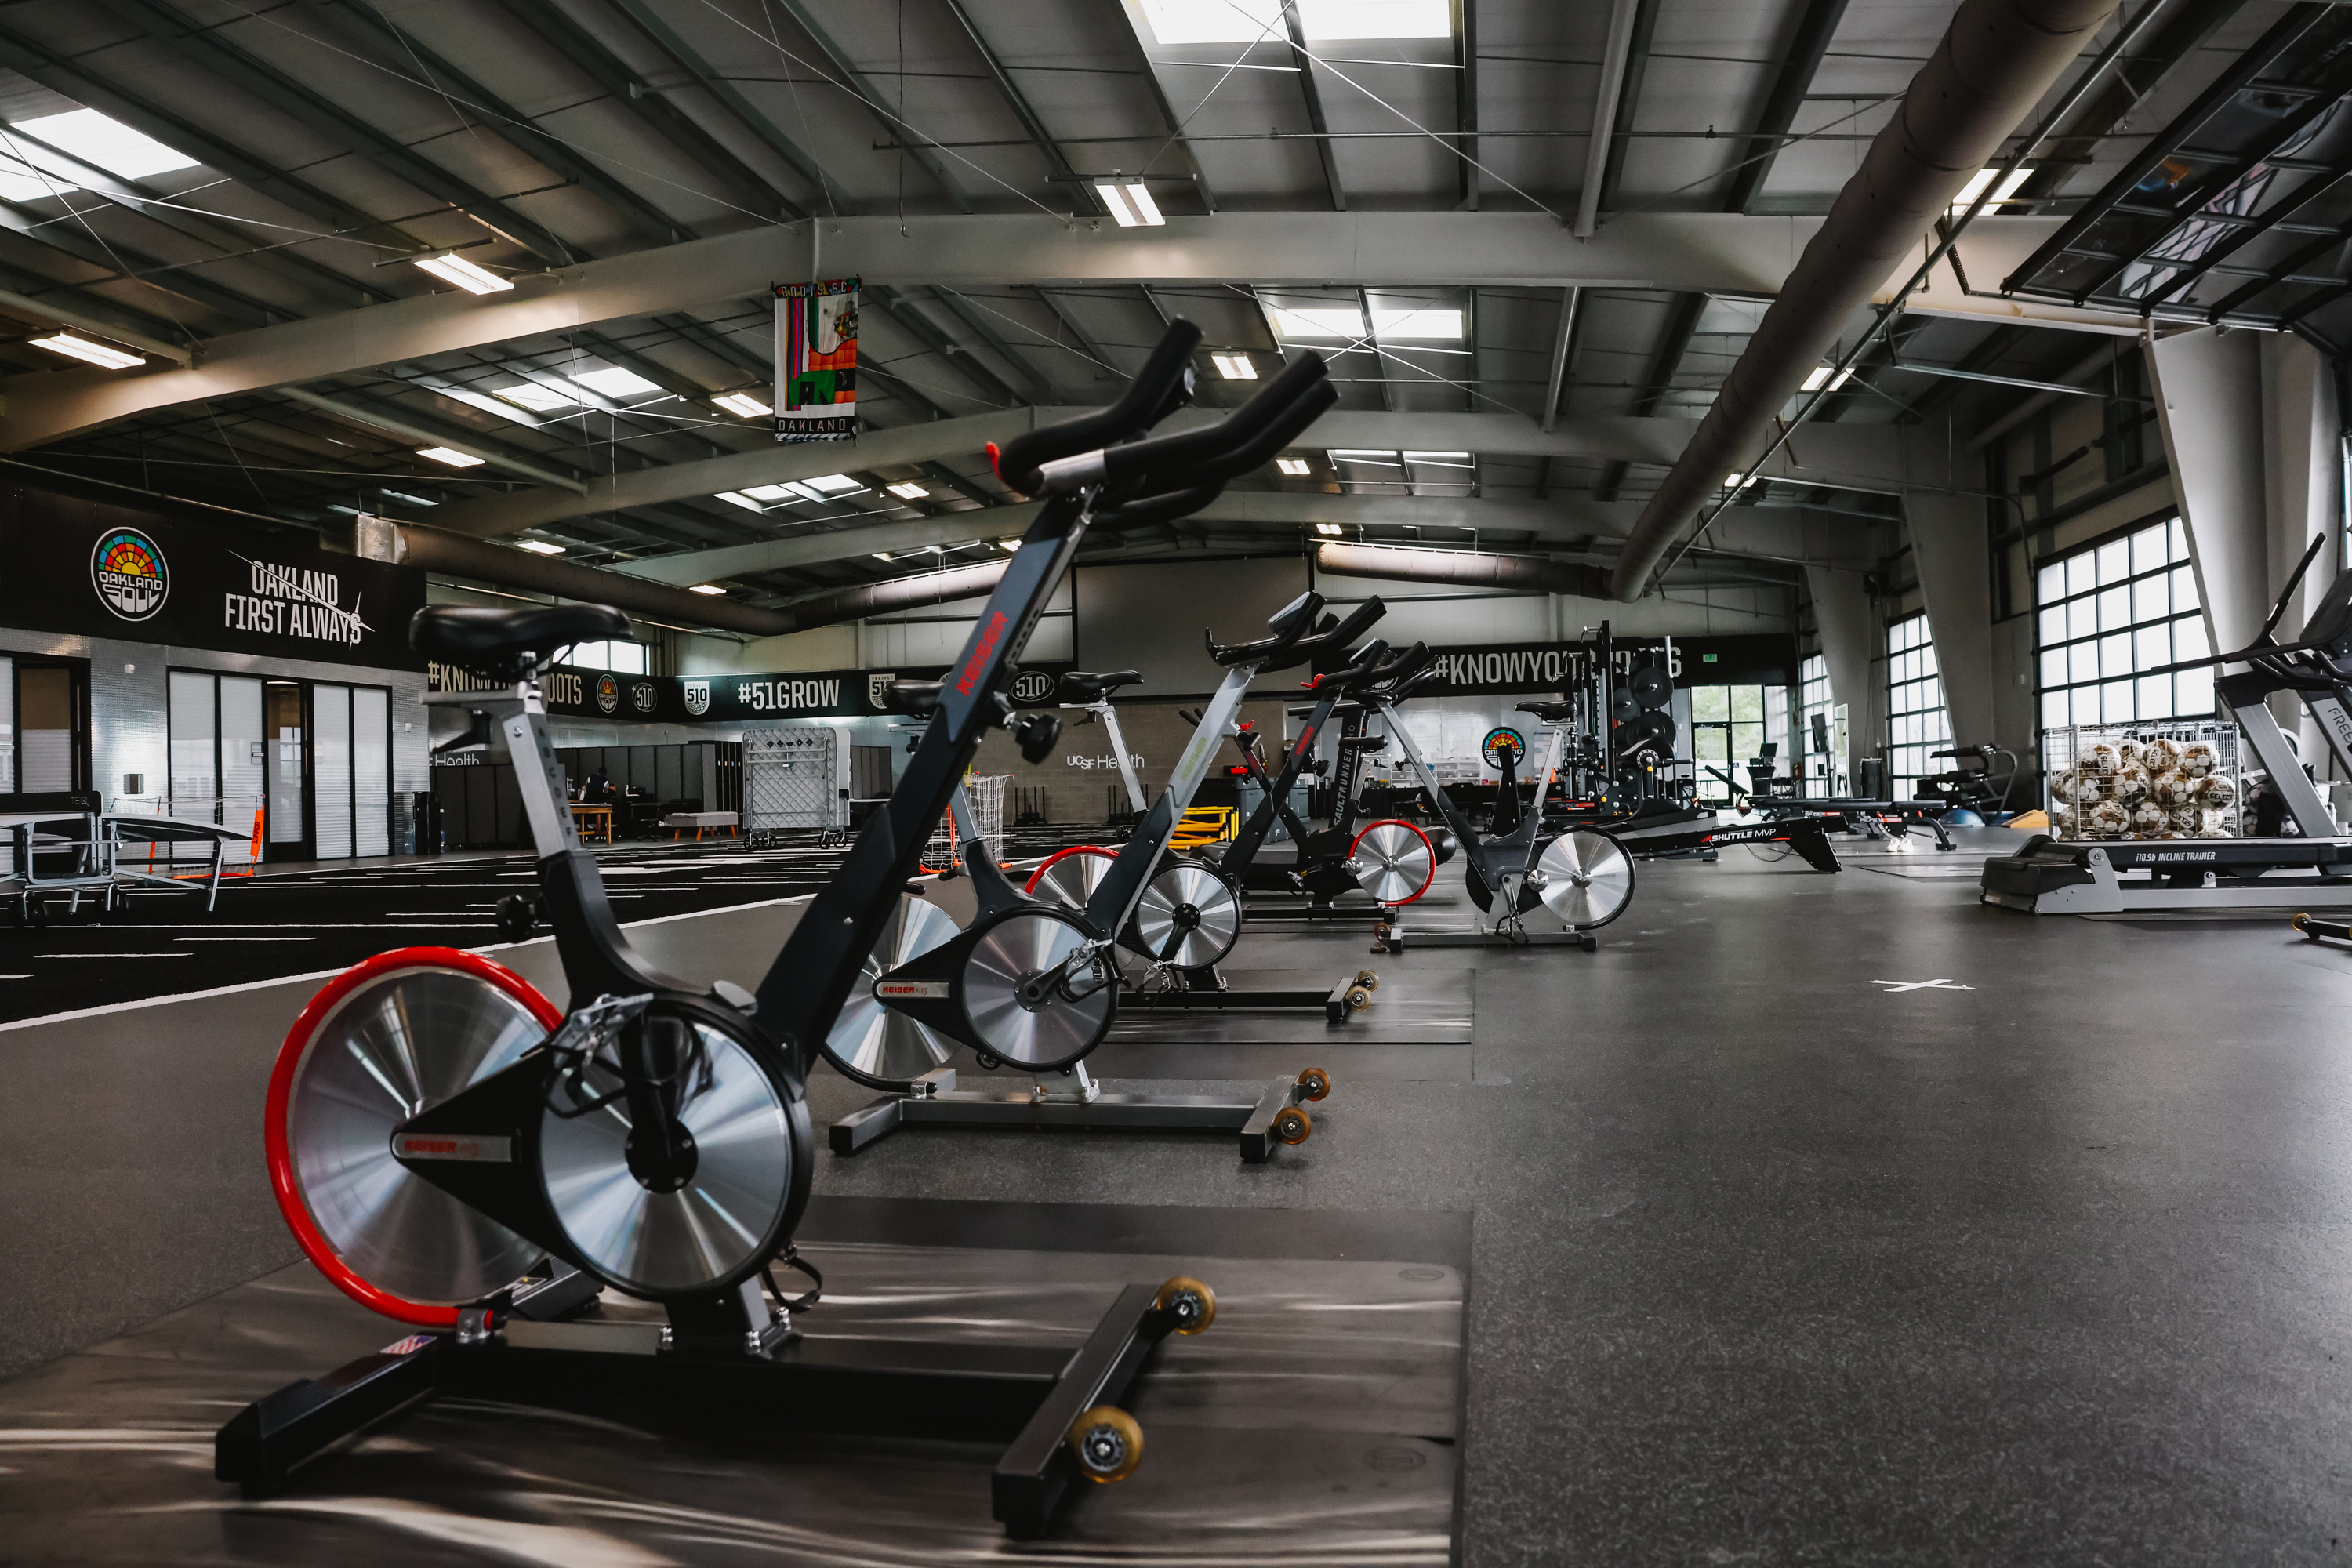 A spacious, modern gym with various exercise equipment, weight racks, and motivational slogans on walls.